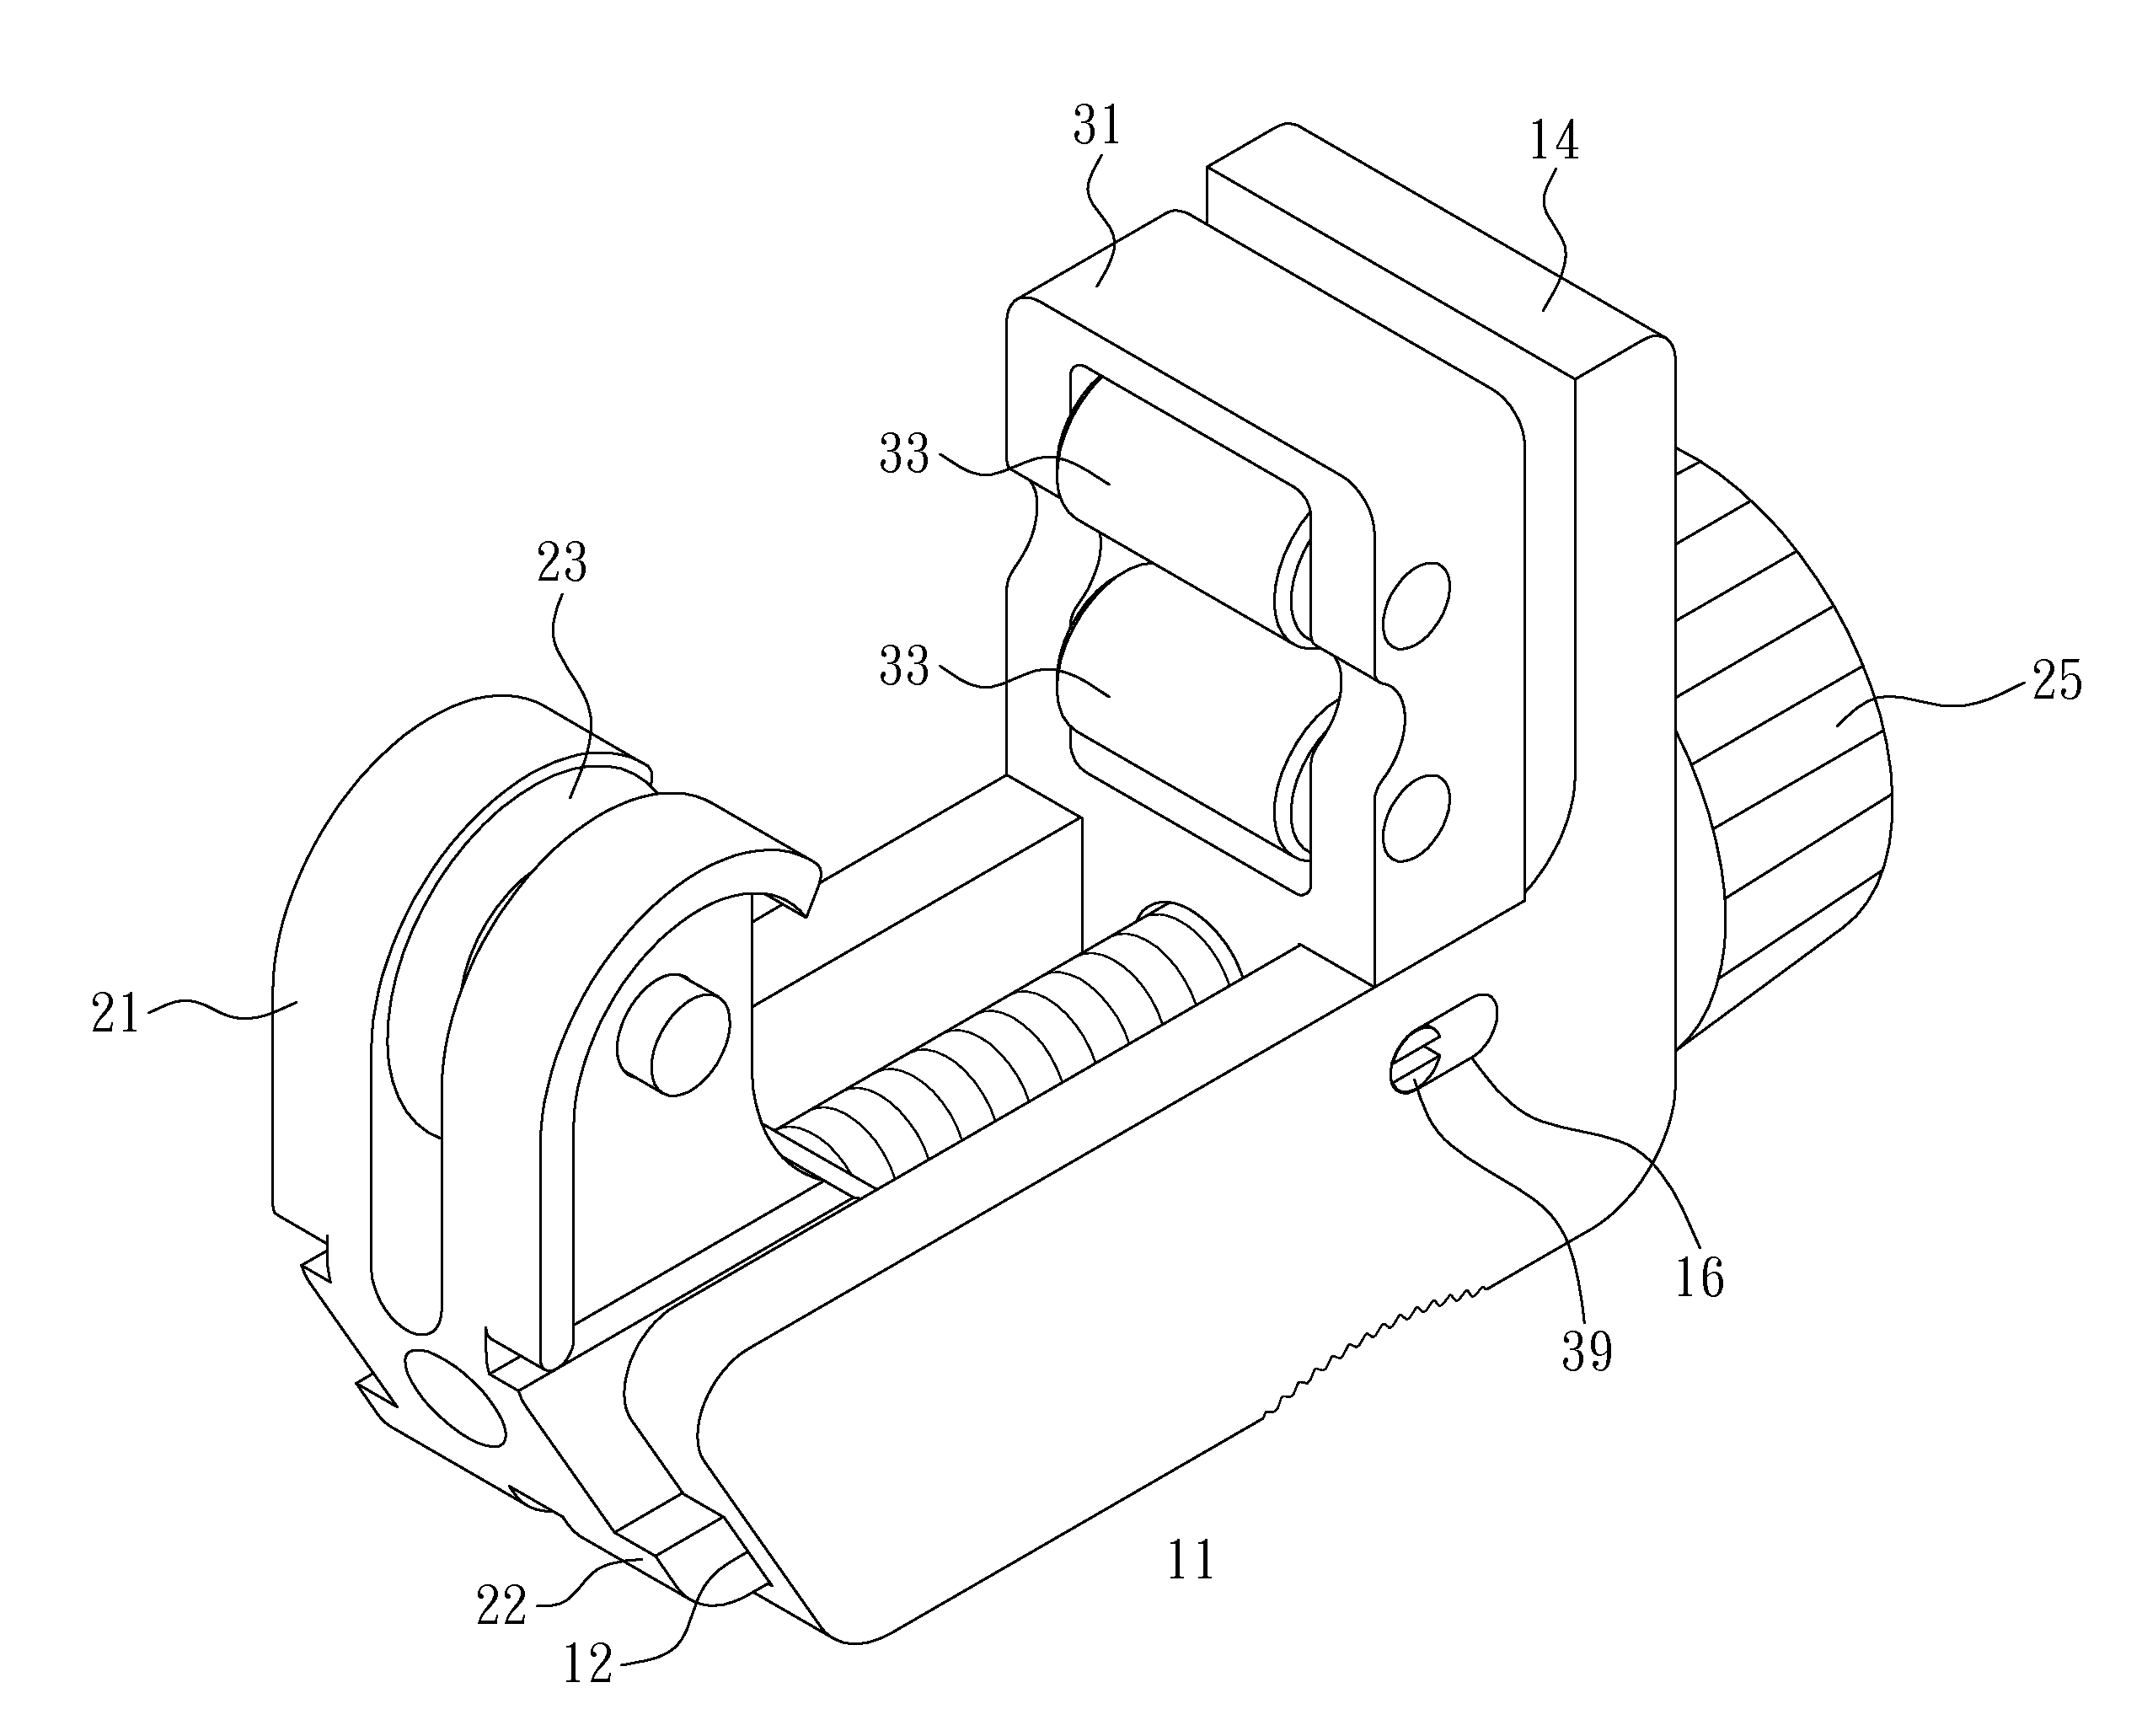 Structure of a Cutting Tool